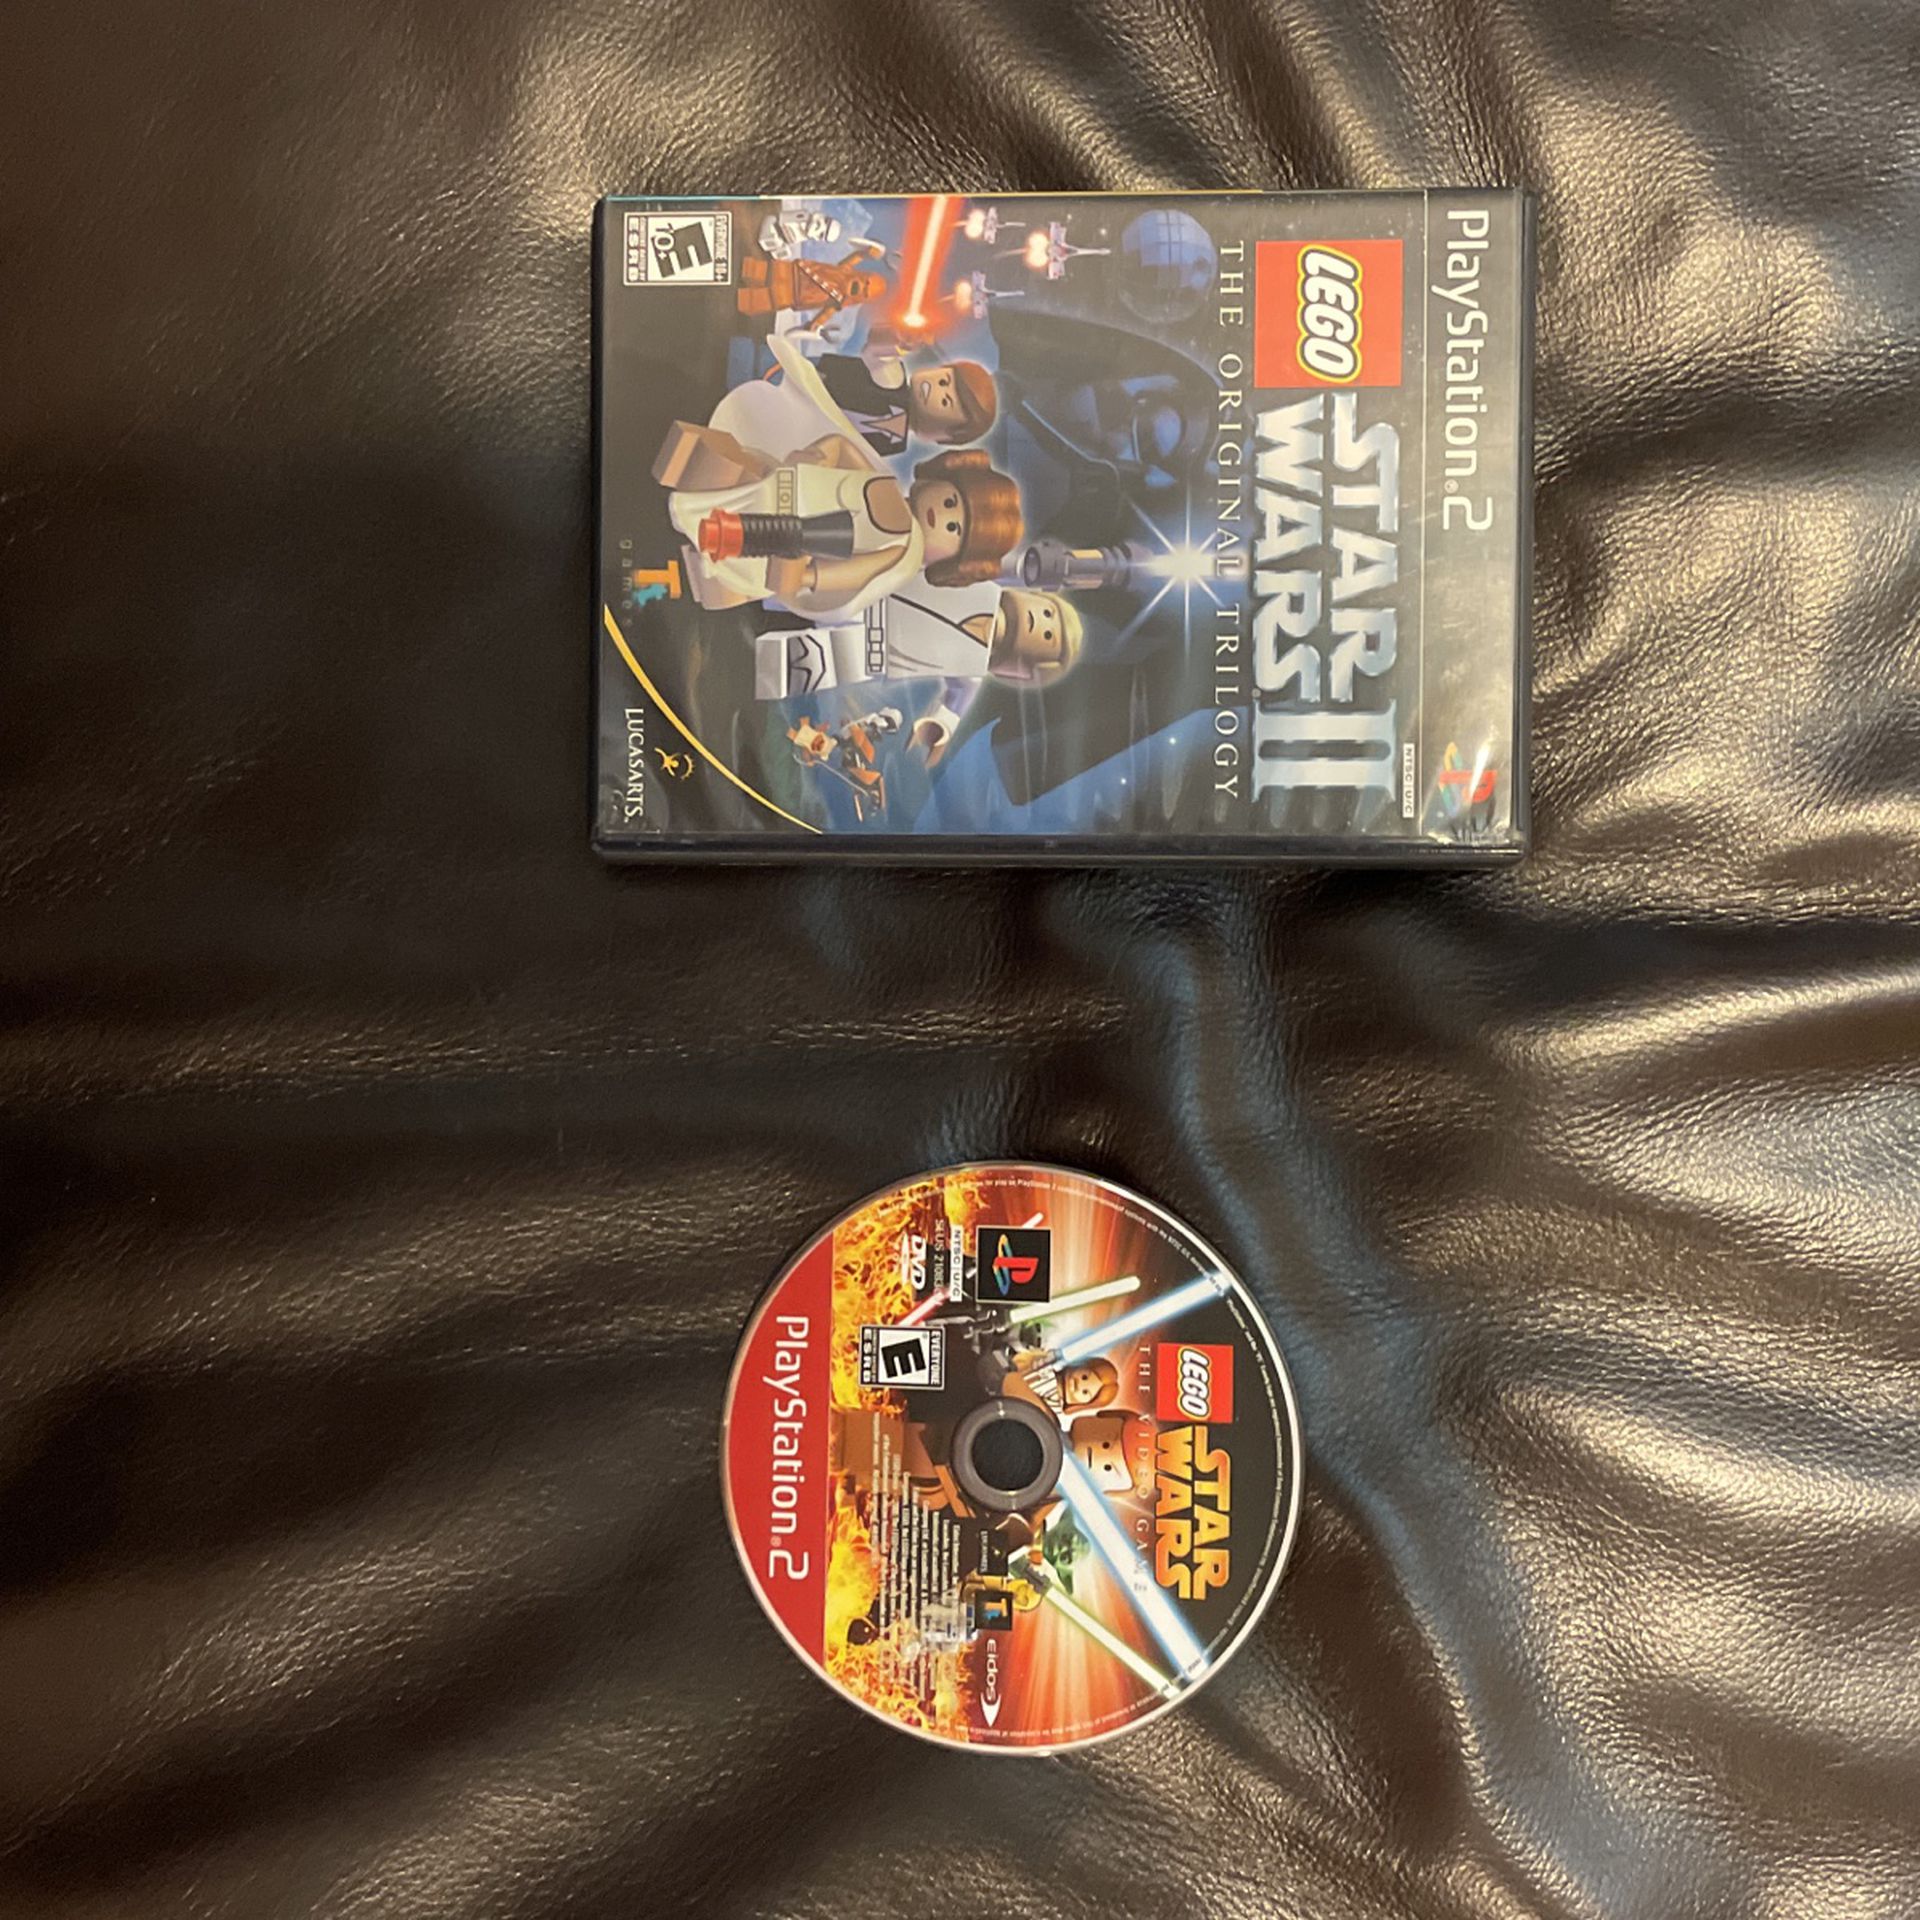 Lego Star Wars 1 And 2 PS2